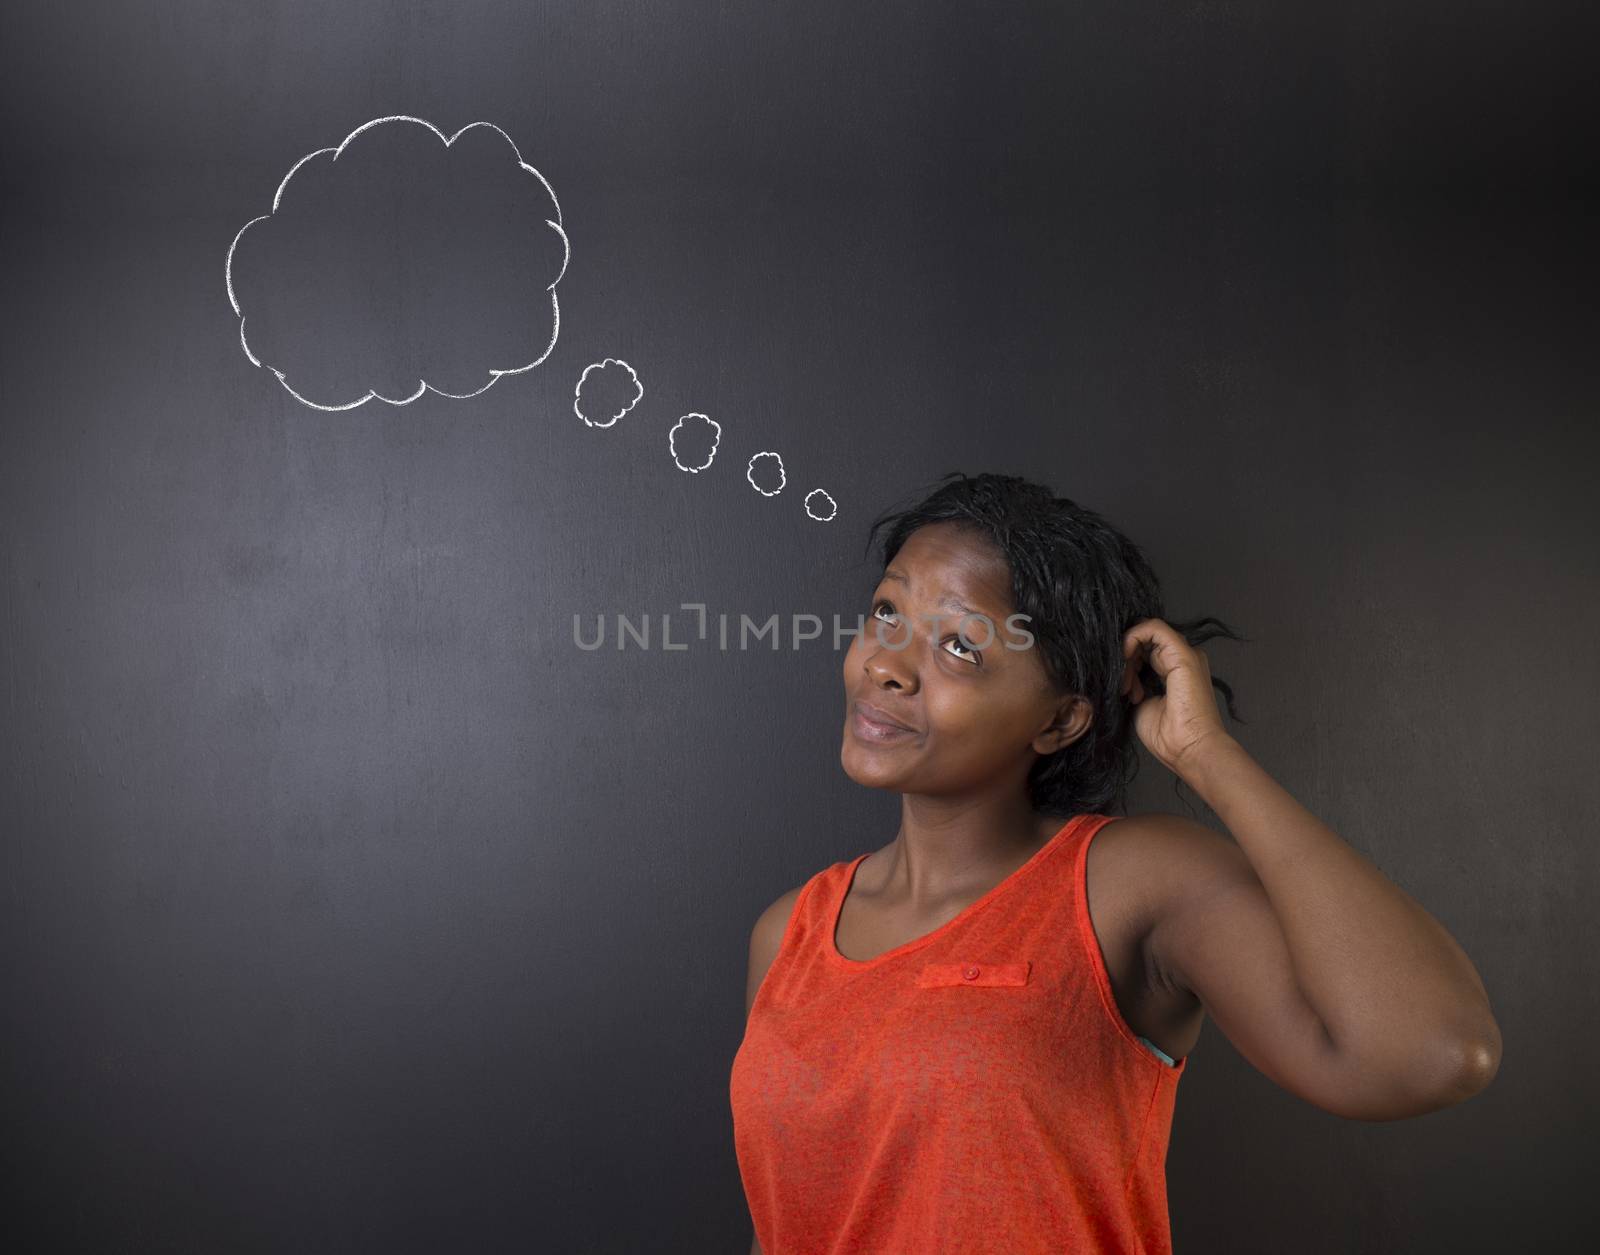 South African or African American woman teacher or student thinking, scratching her head standing against a blackboard background with chalk thought clouds